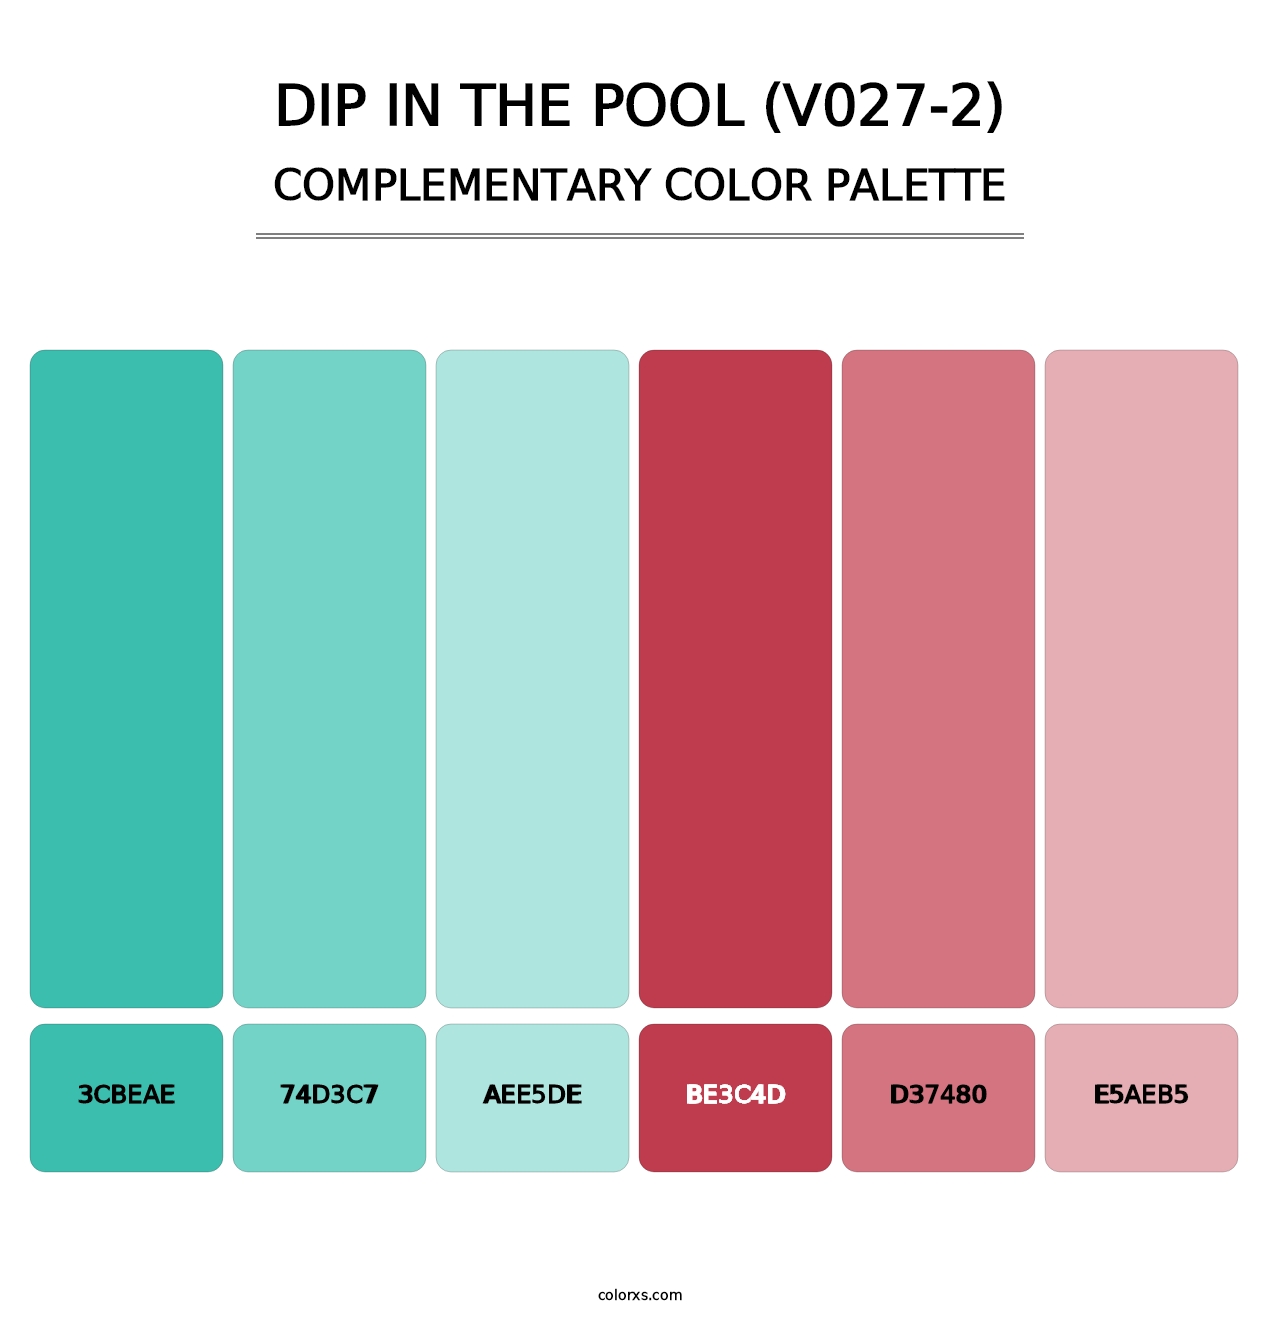 Dip in the Pool (V027-2) - Complementary Color Palette